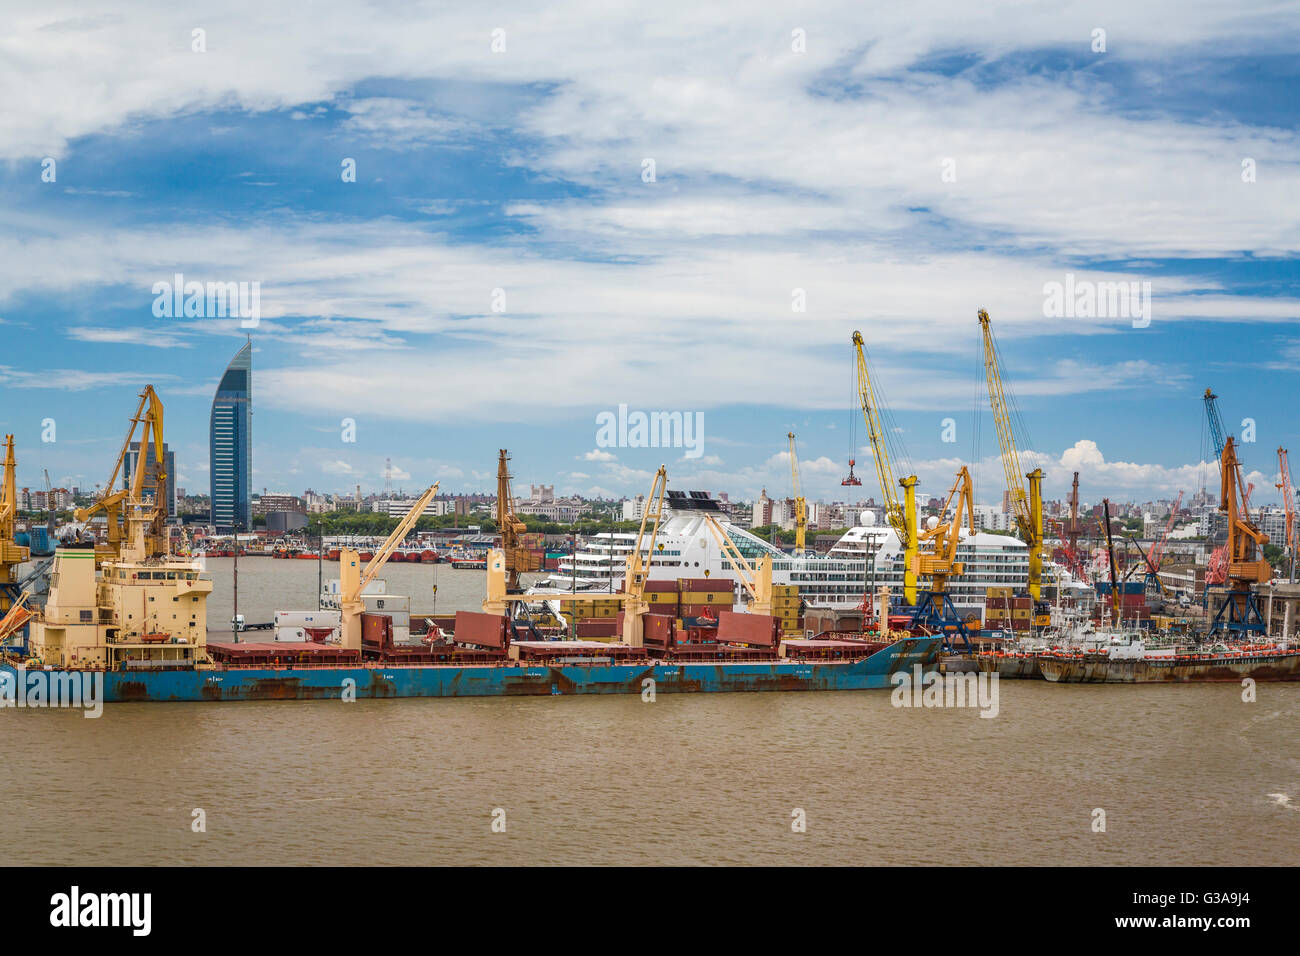 The port in Montevideo, Uruguay, South America. Stock Photo